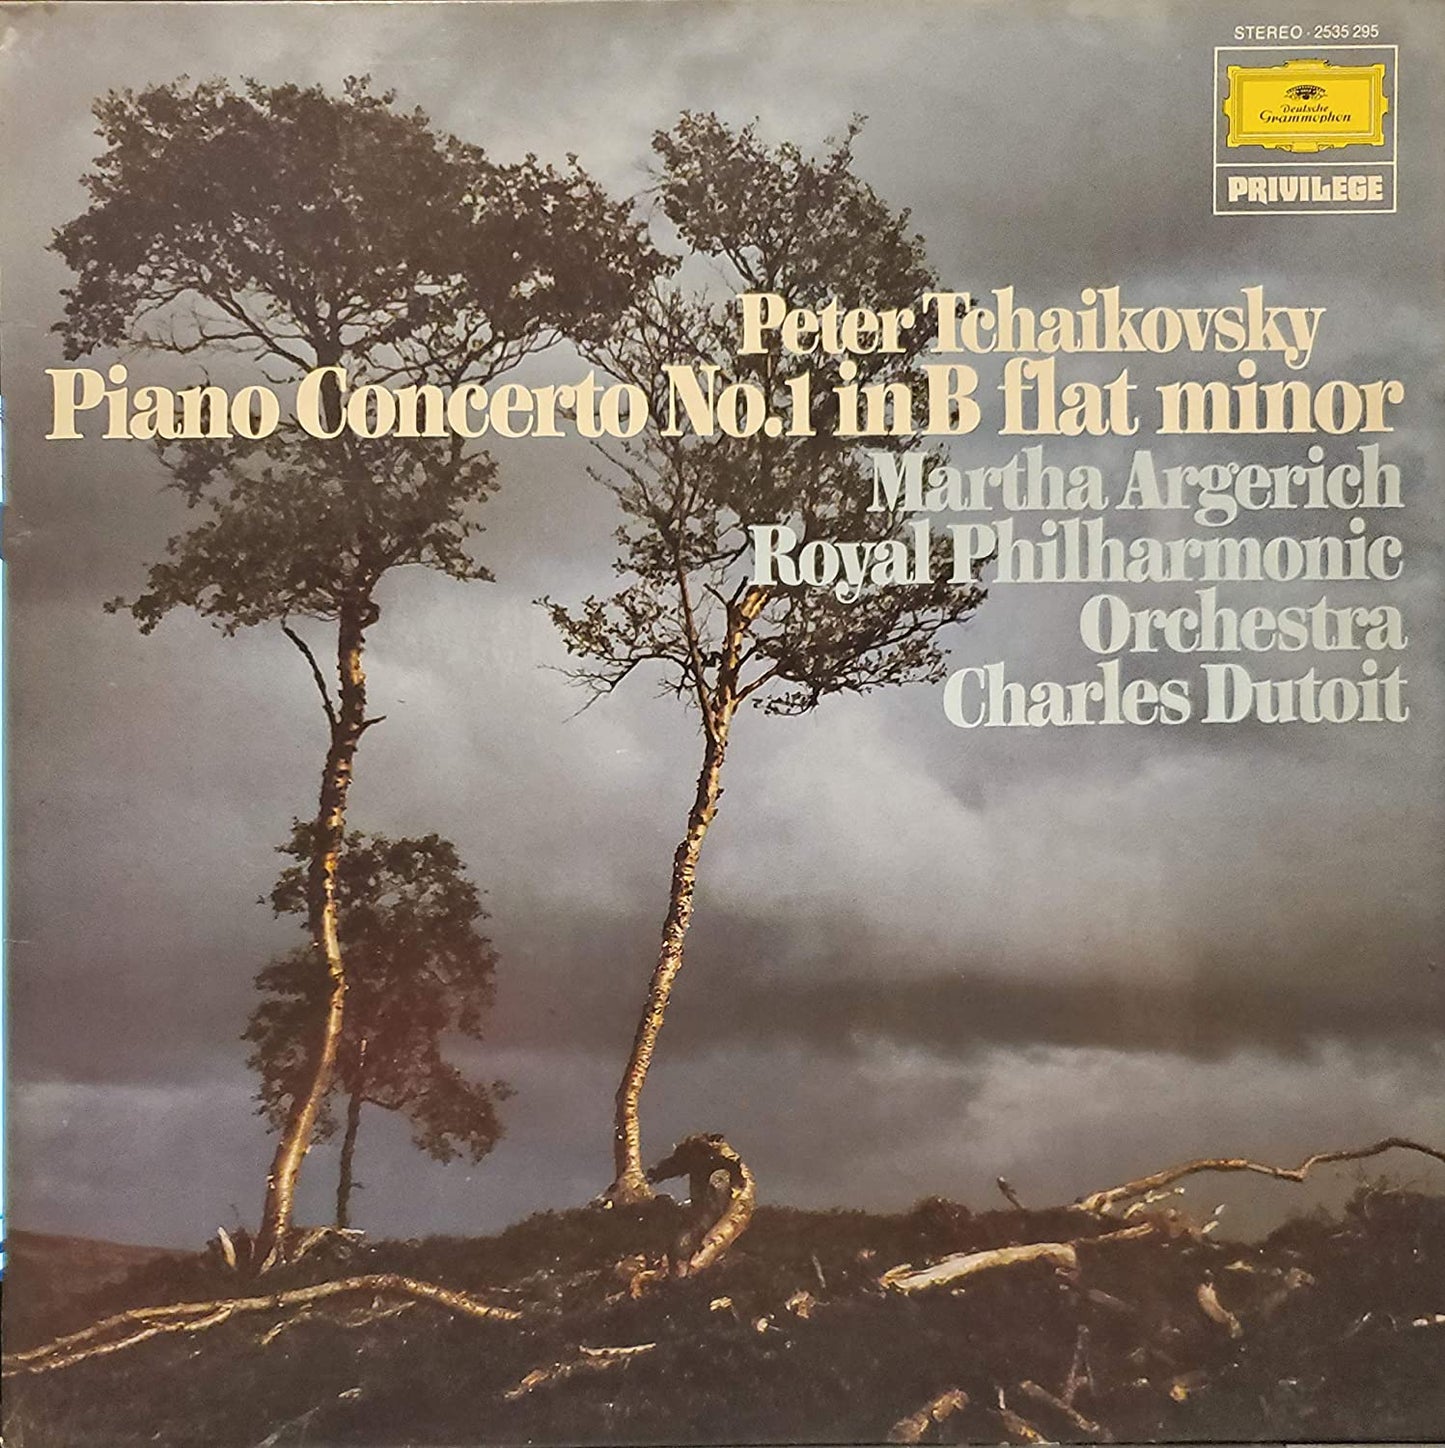 Tchaikovsky, Martha Argerich, Charles Dutoit - Royal Philharmonic Orchestra – Piano Concerto No. 1 In B Flat Minor